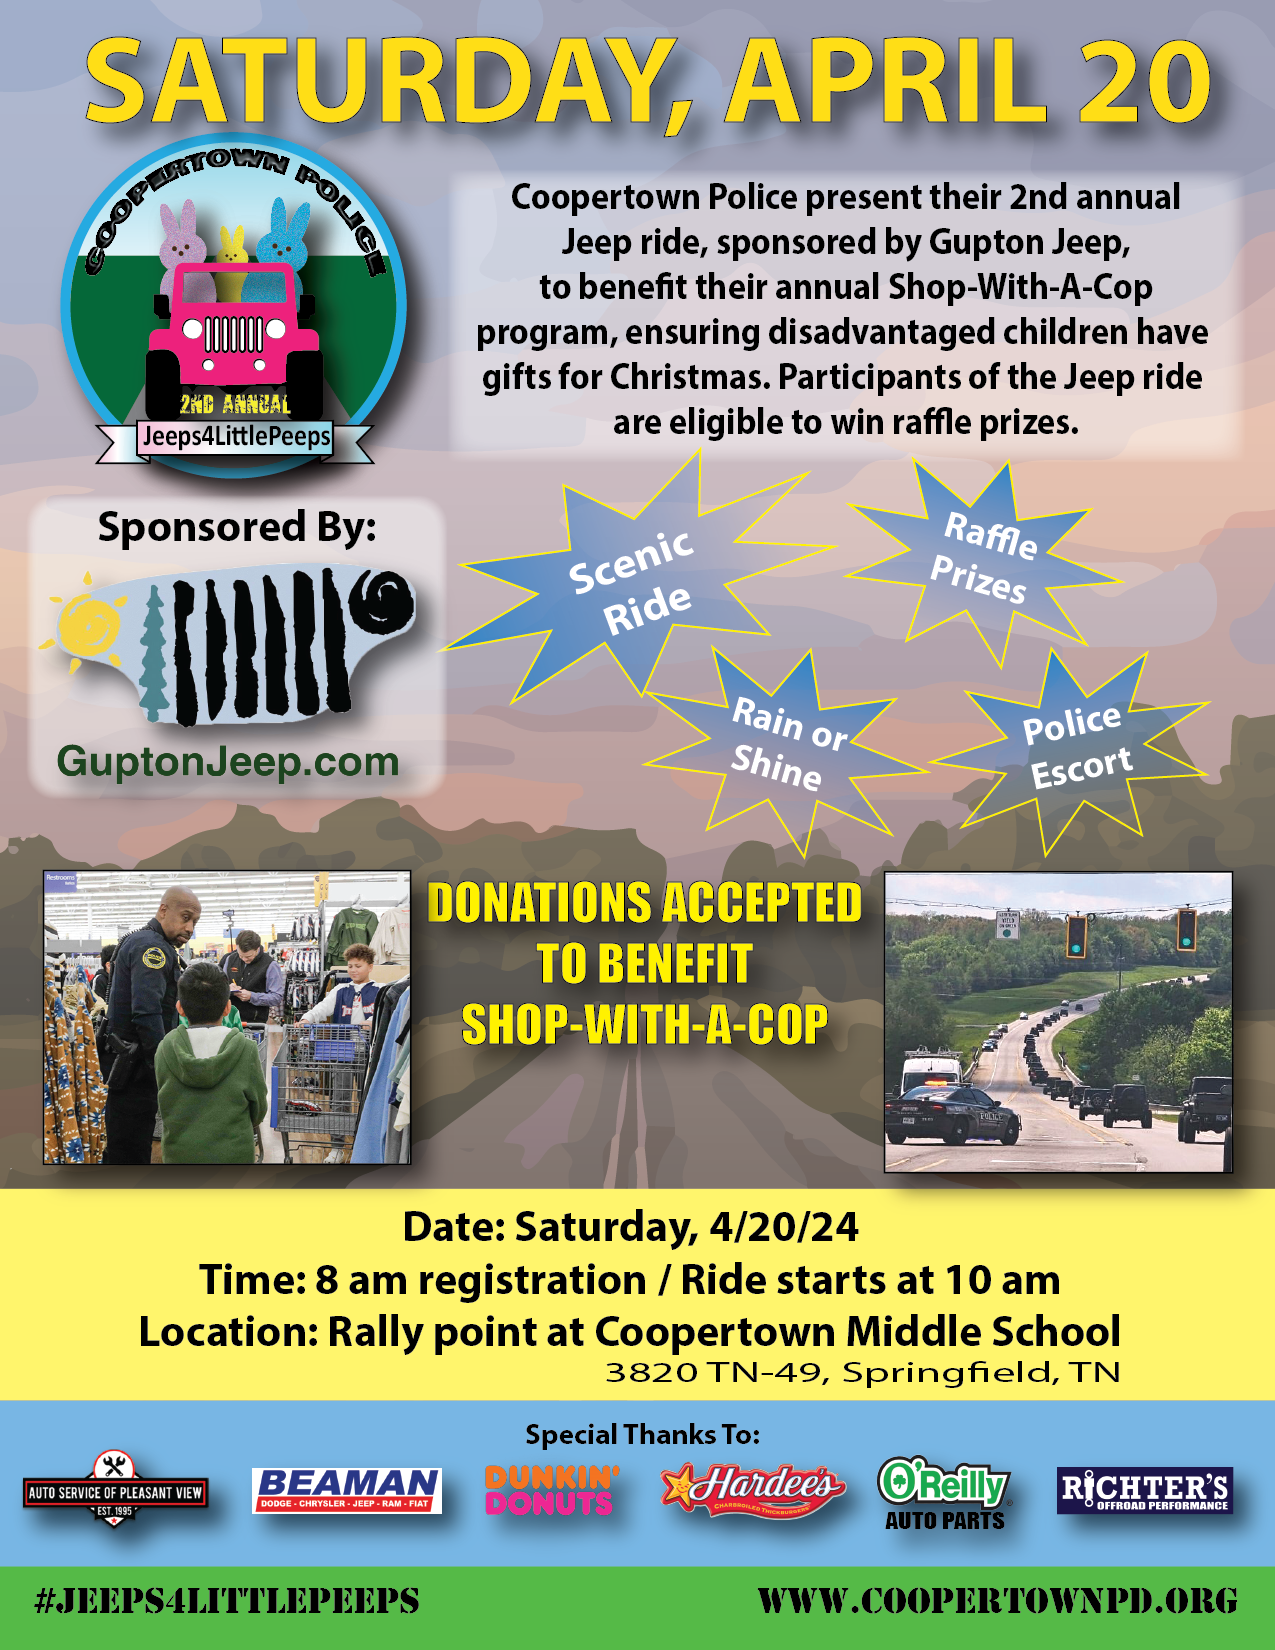 Coopertown Police Department’s 2nd Annual Jeeps4LittlePeeps Jeep Ride